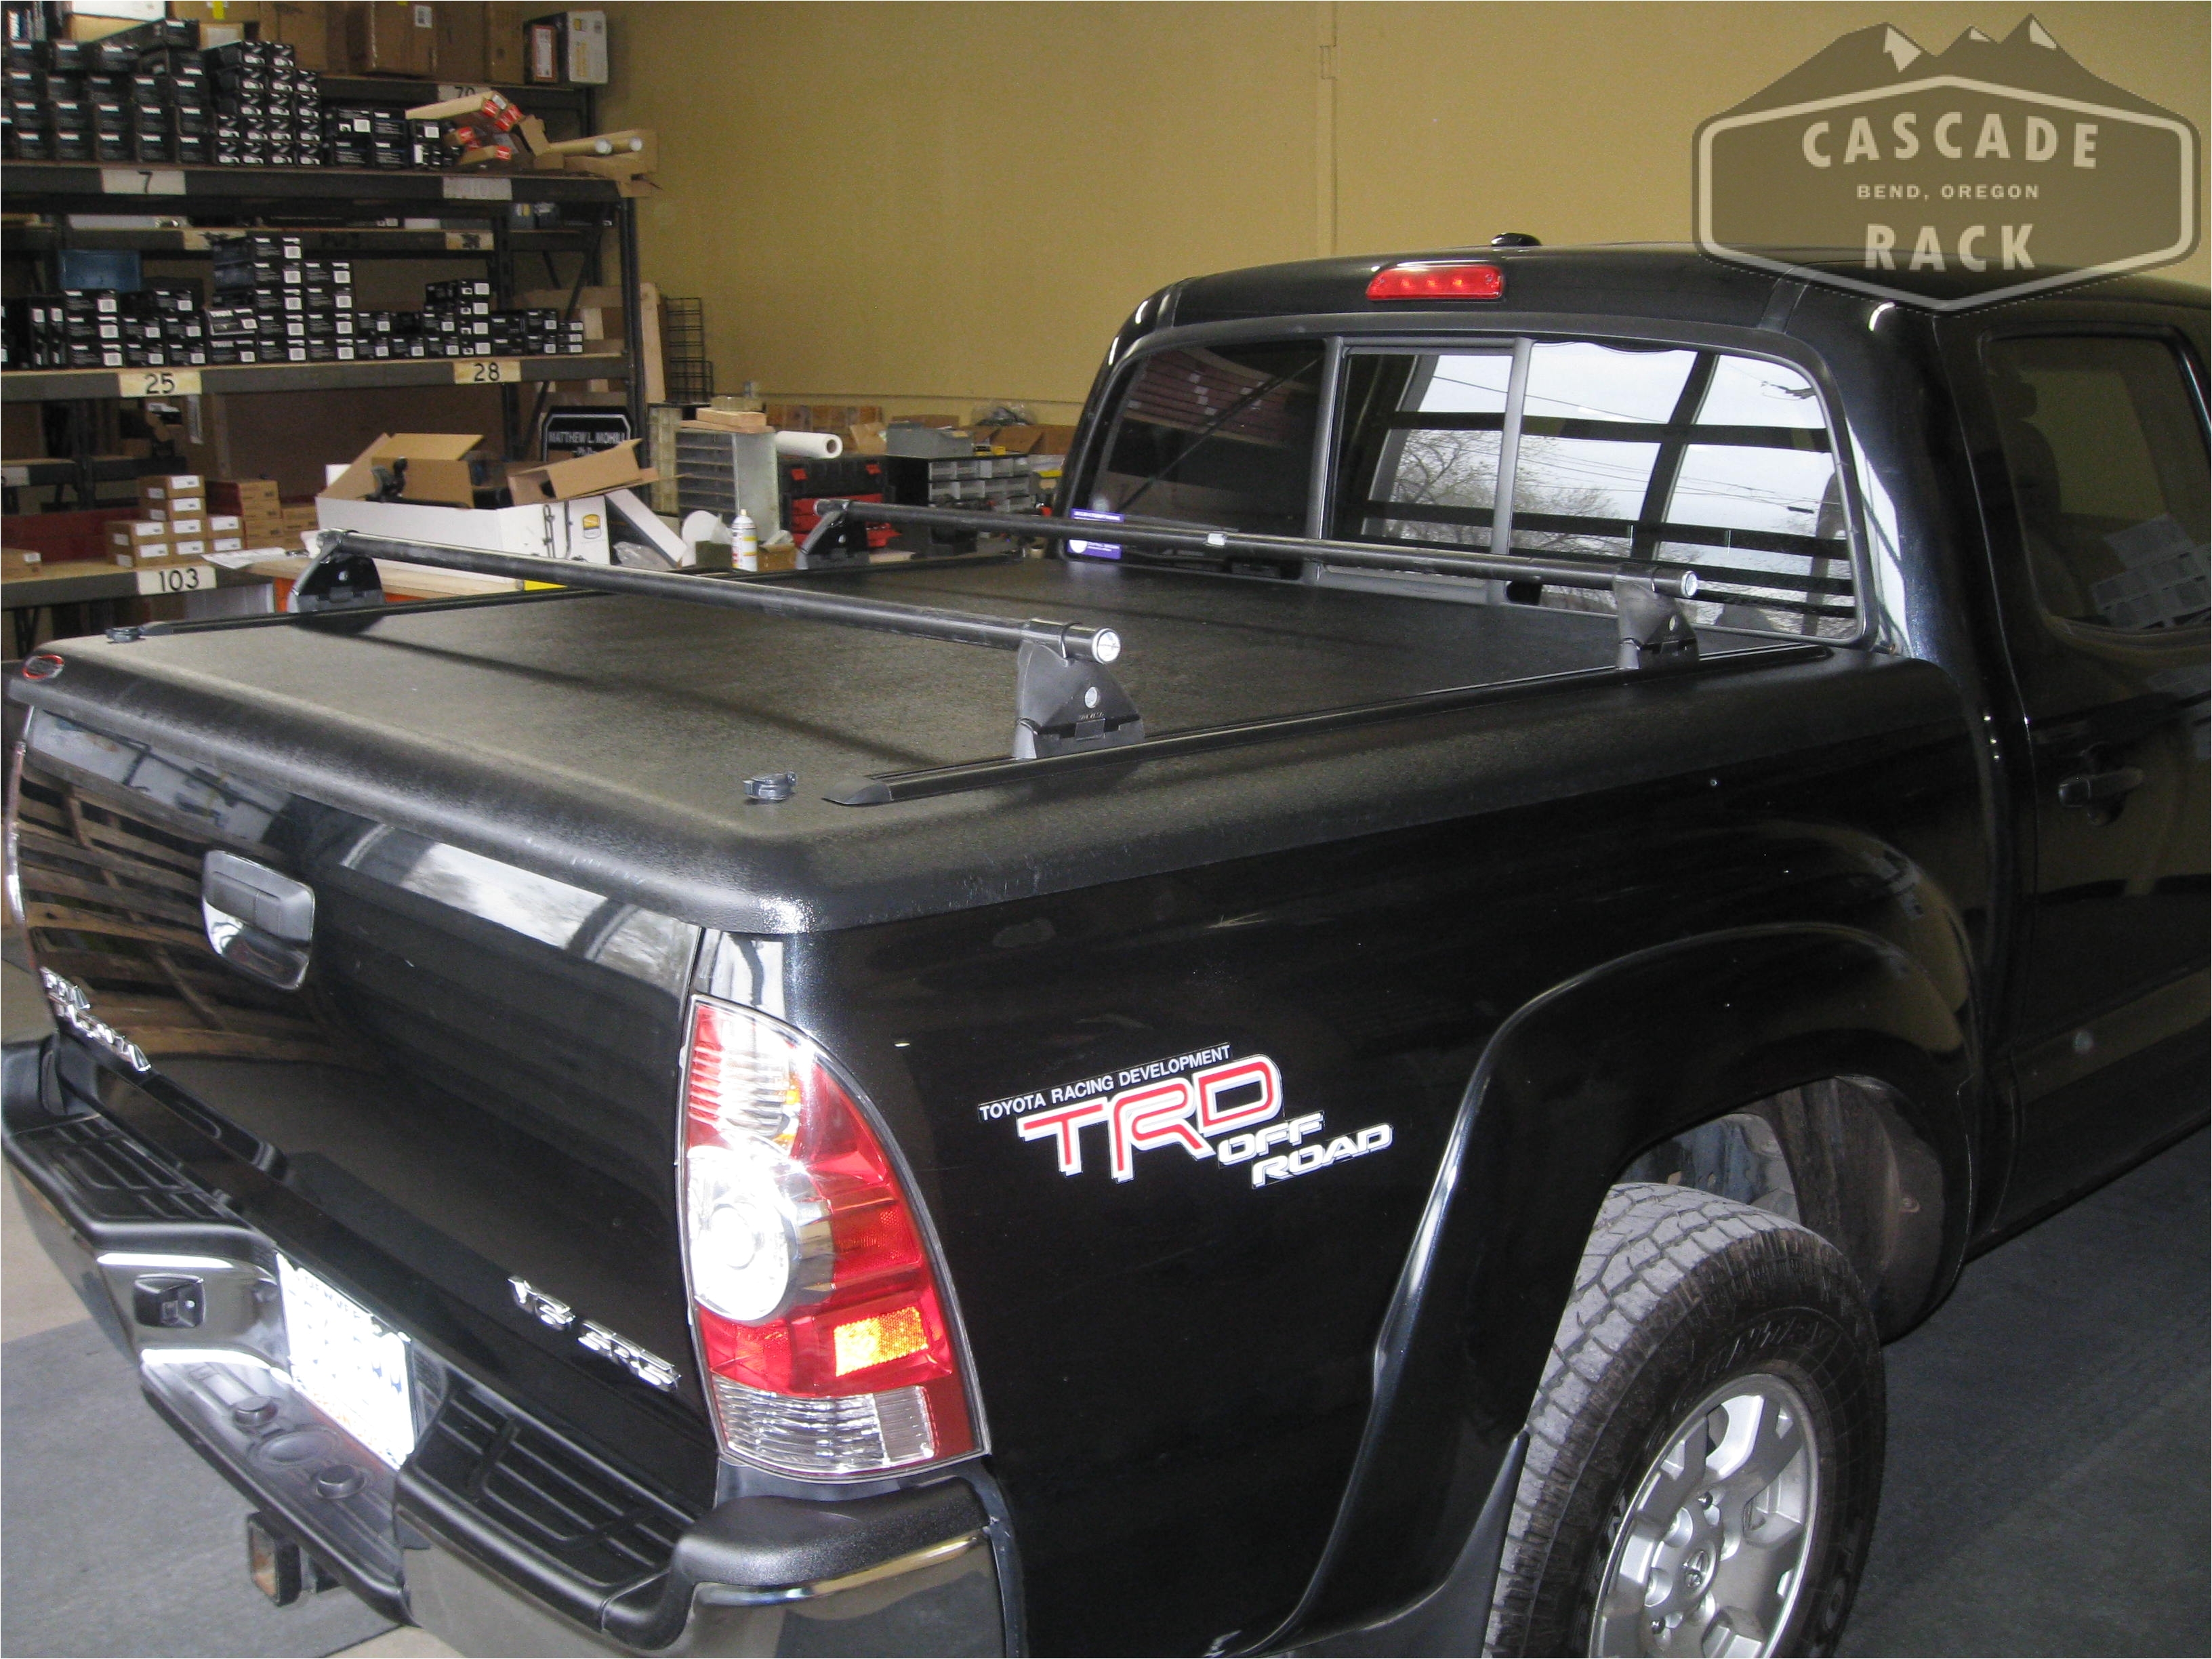 full image for toyota truck bed cover 76 toyota pickup truck bed covers cascade rack installation